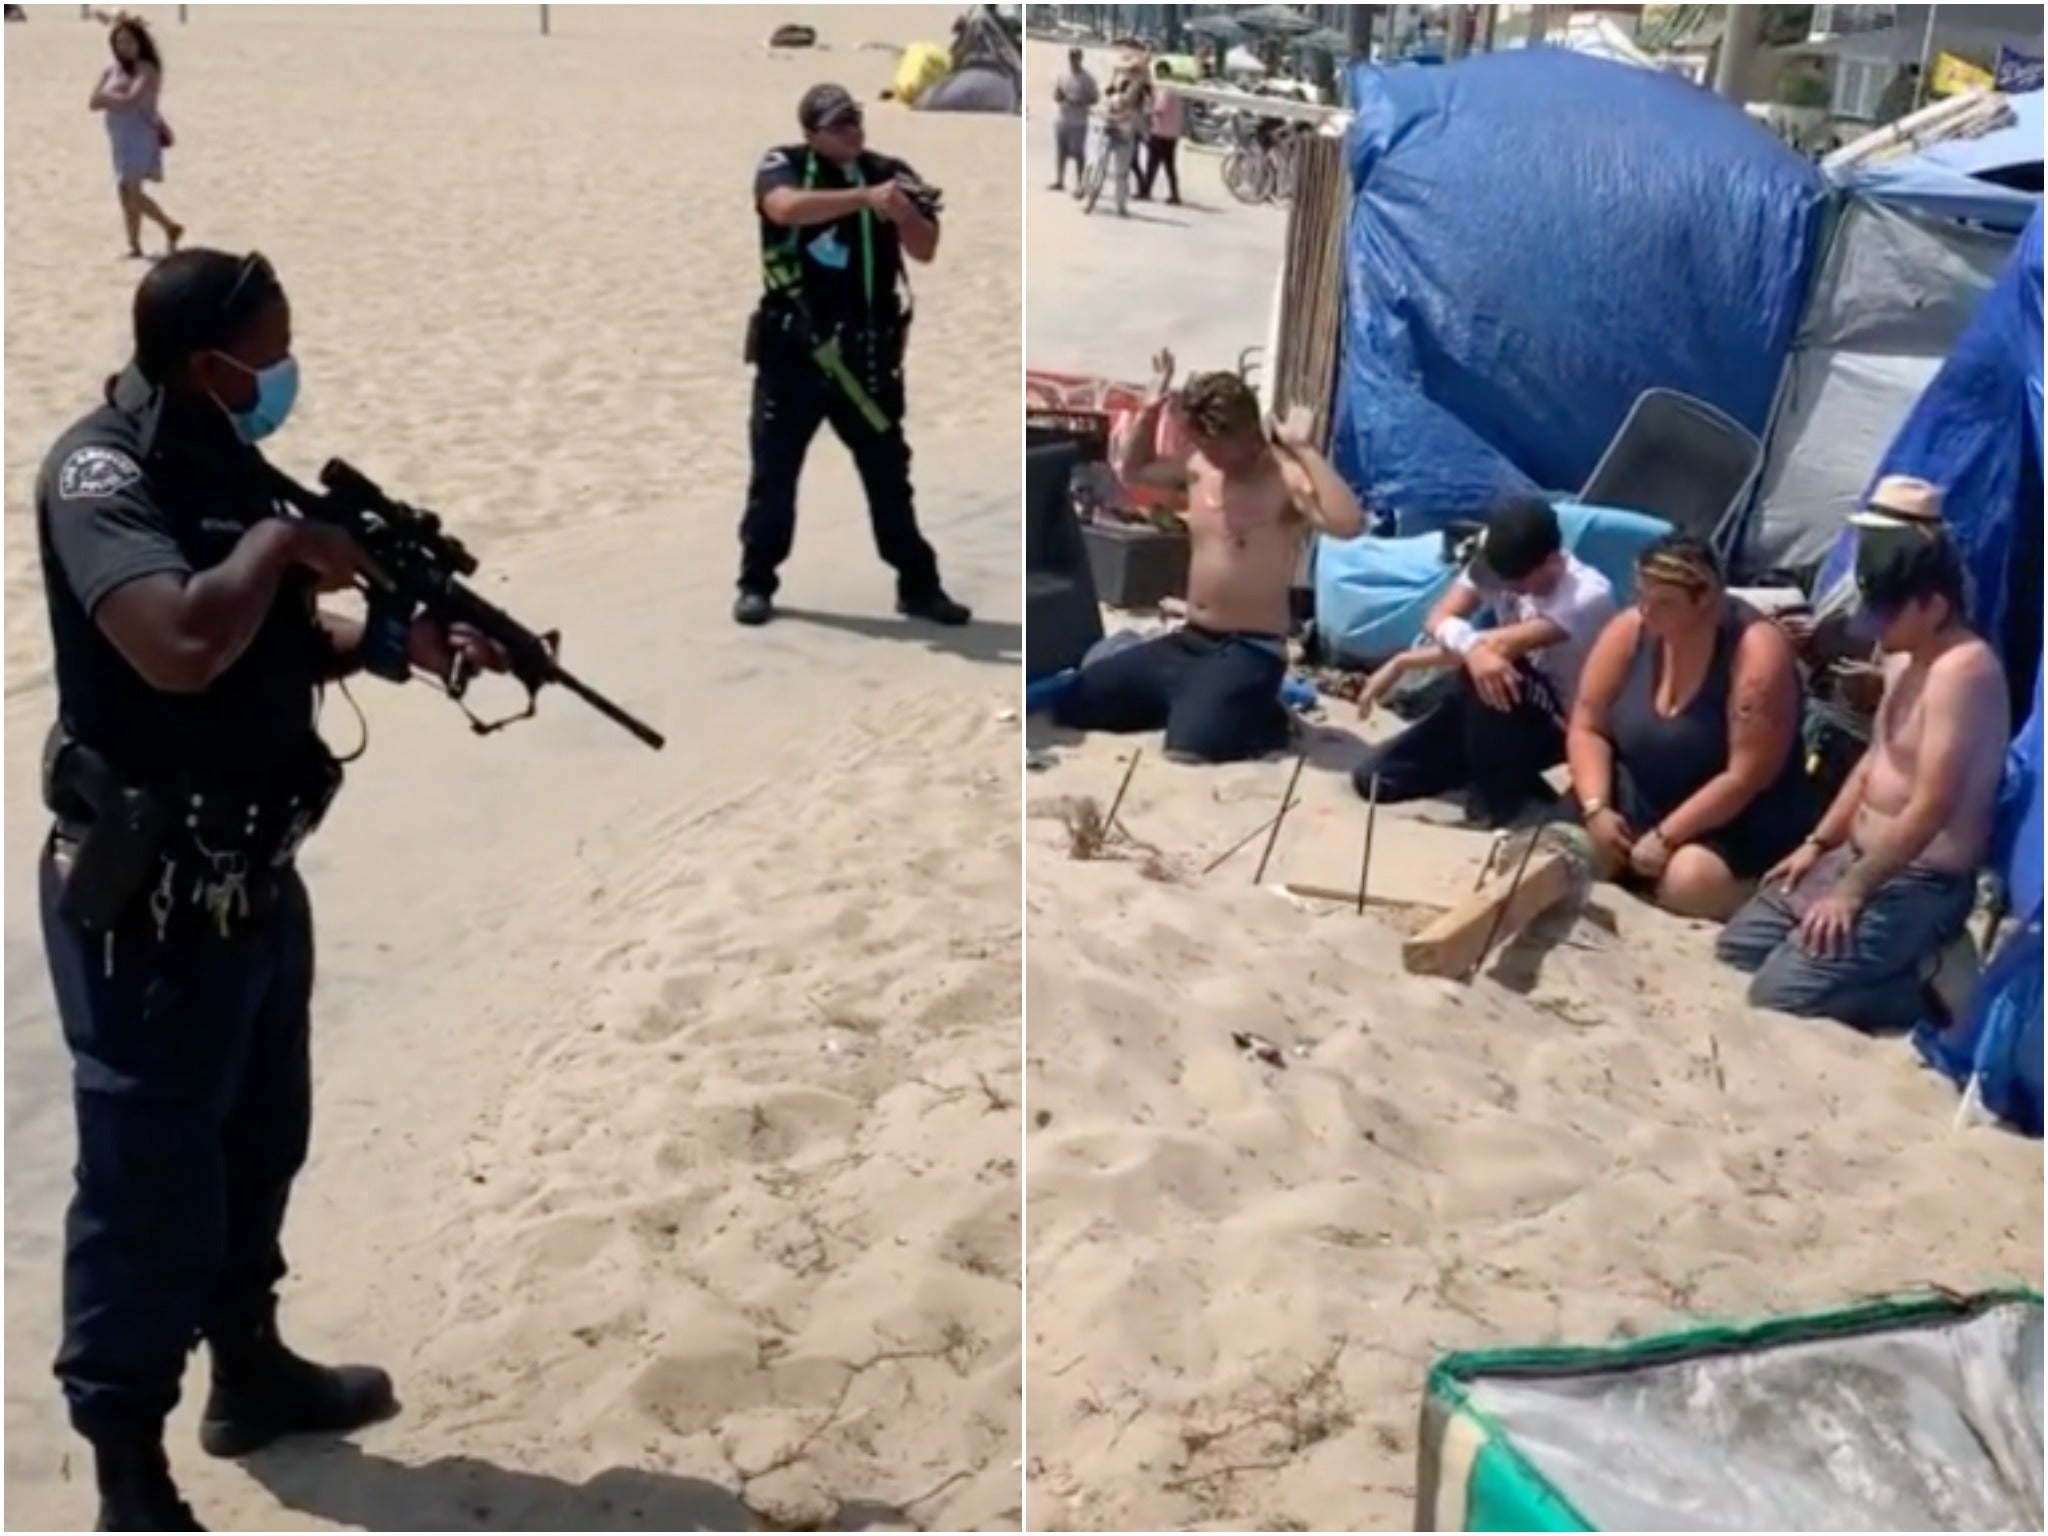 The LAPD has responded after a video showing heavily armed police officers raiding a homeless camp in Venice Beach went viral, garnering millions of views.